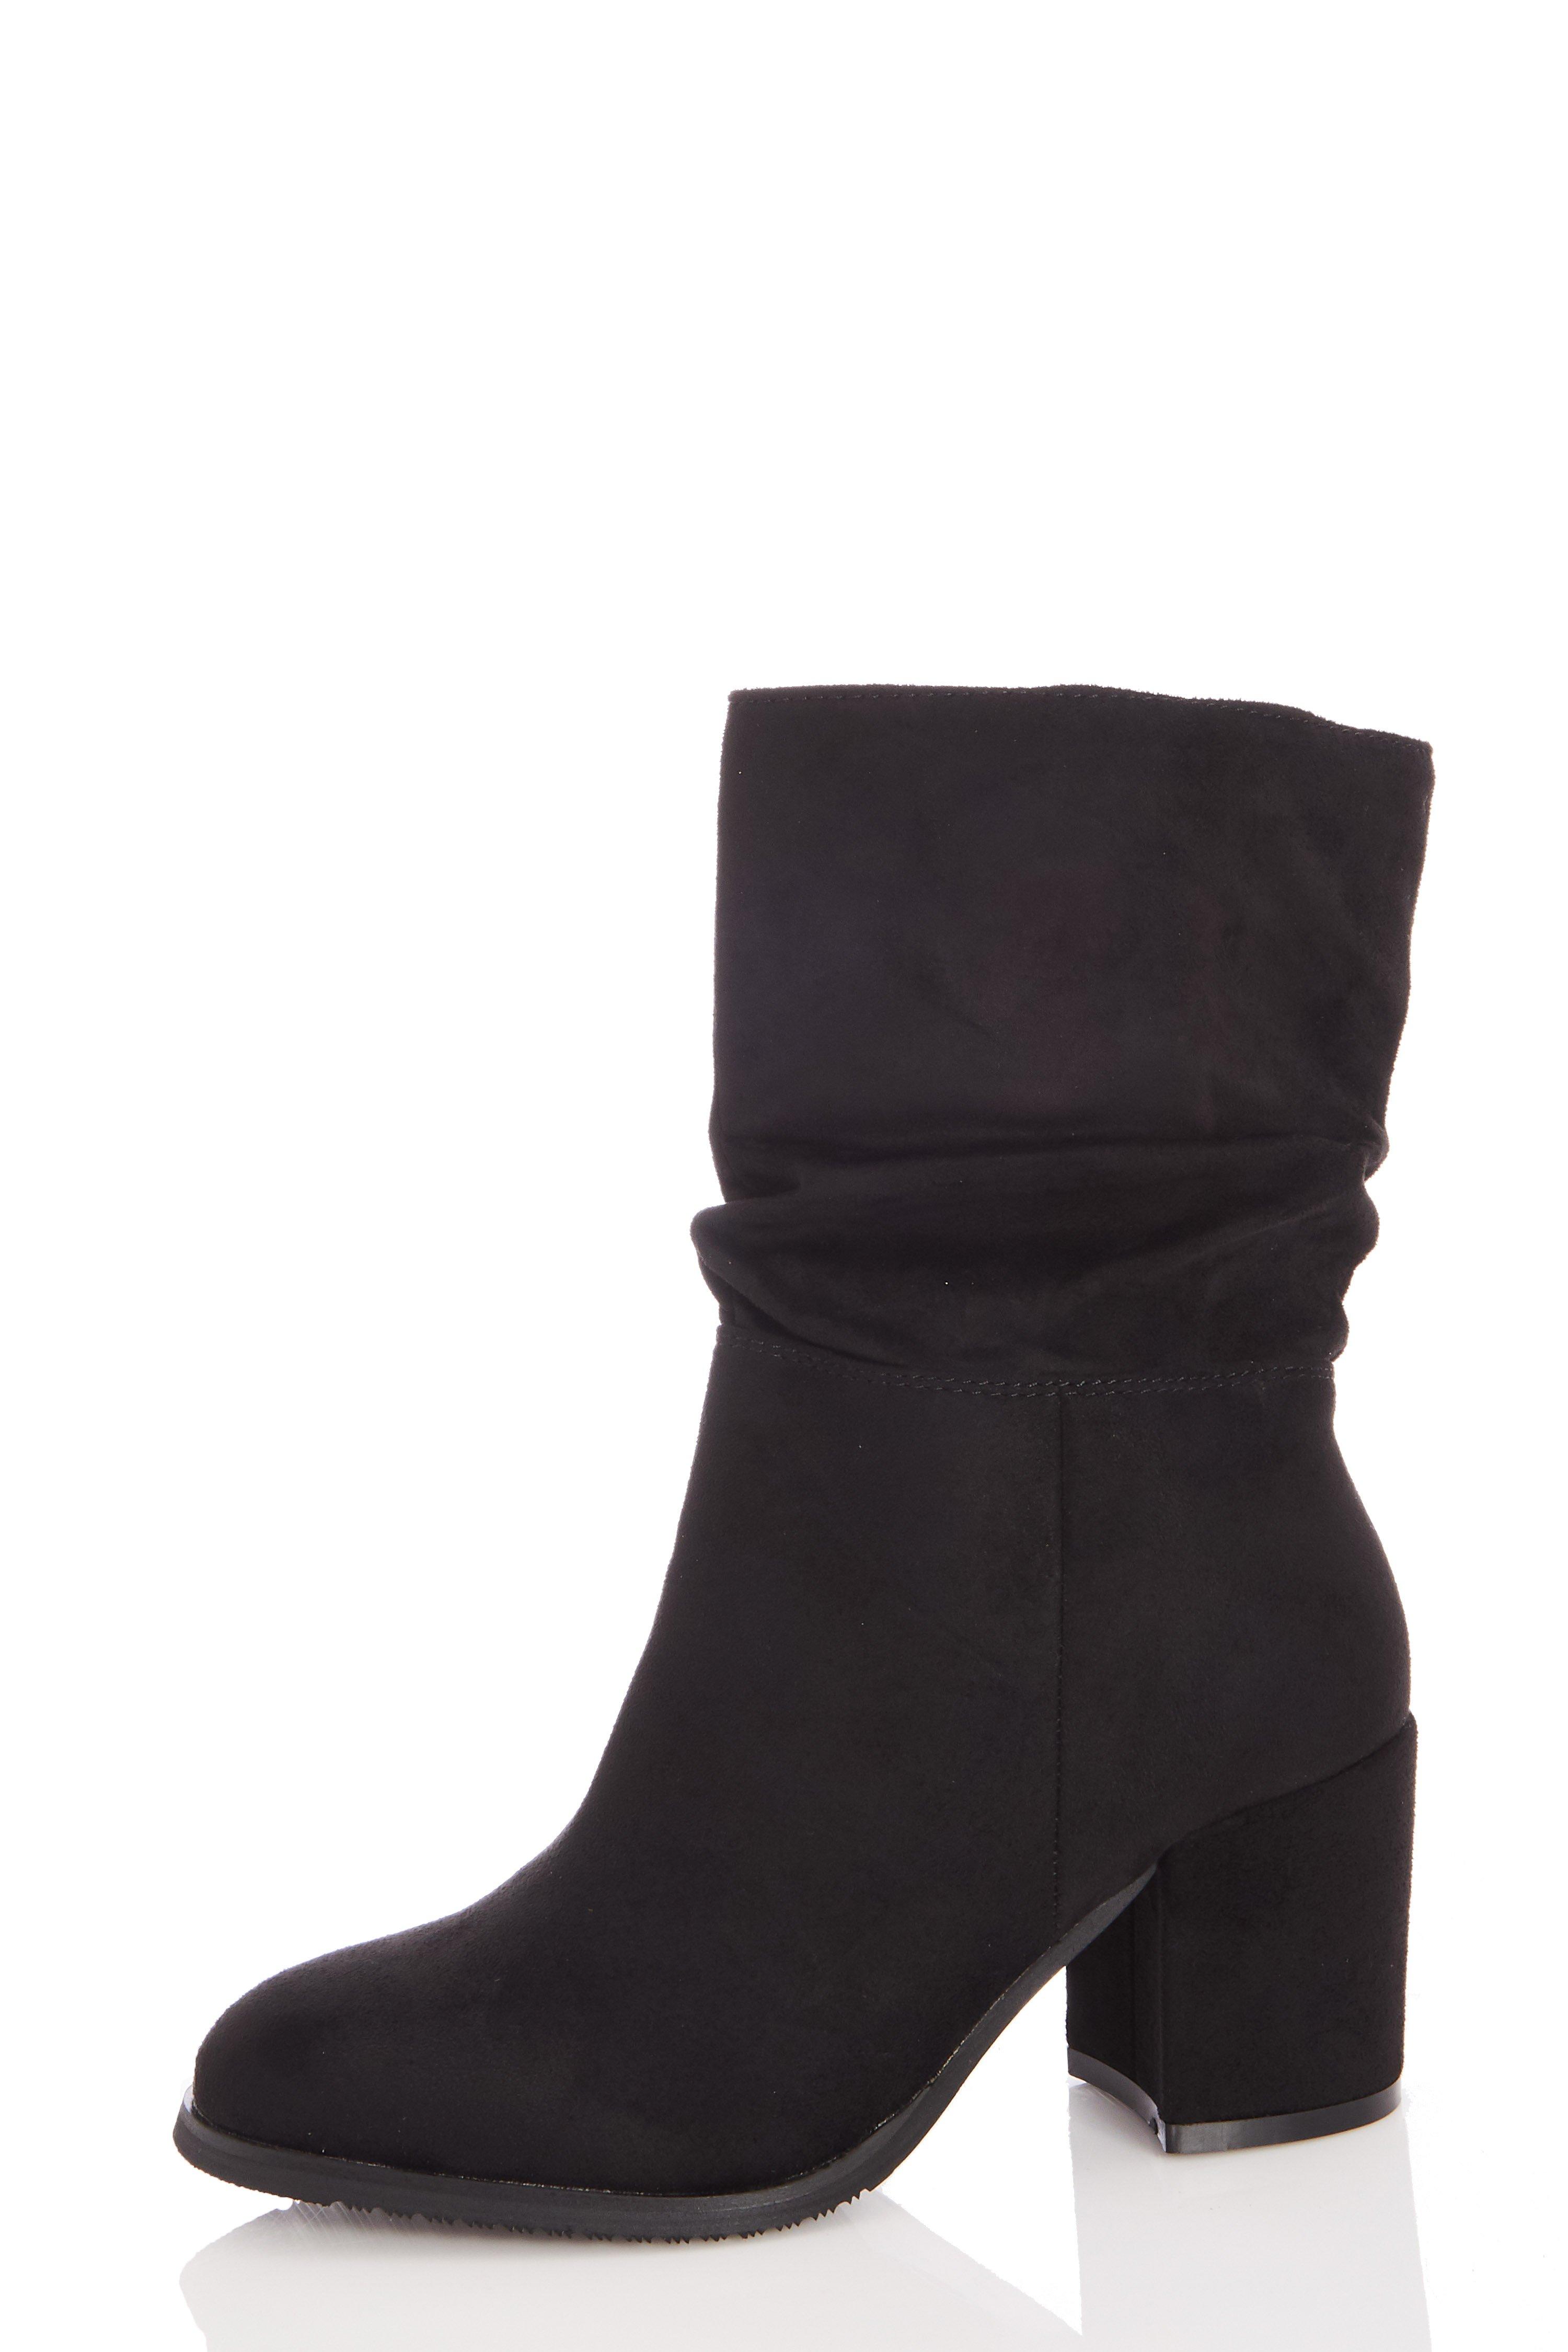 Black Faux Suede Ruched Block Heel Ankle Boots - Quiz Clothing